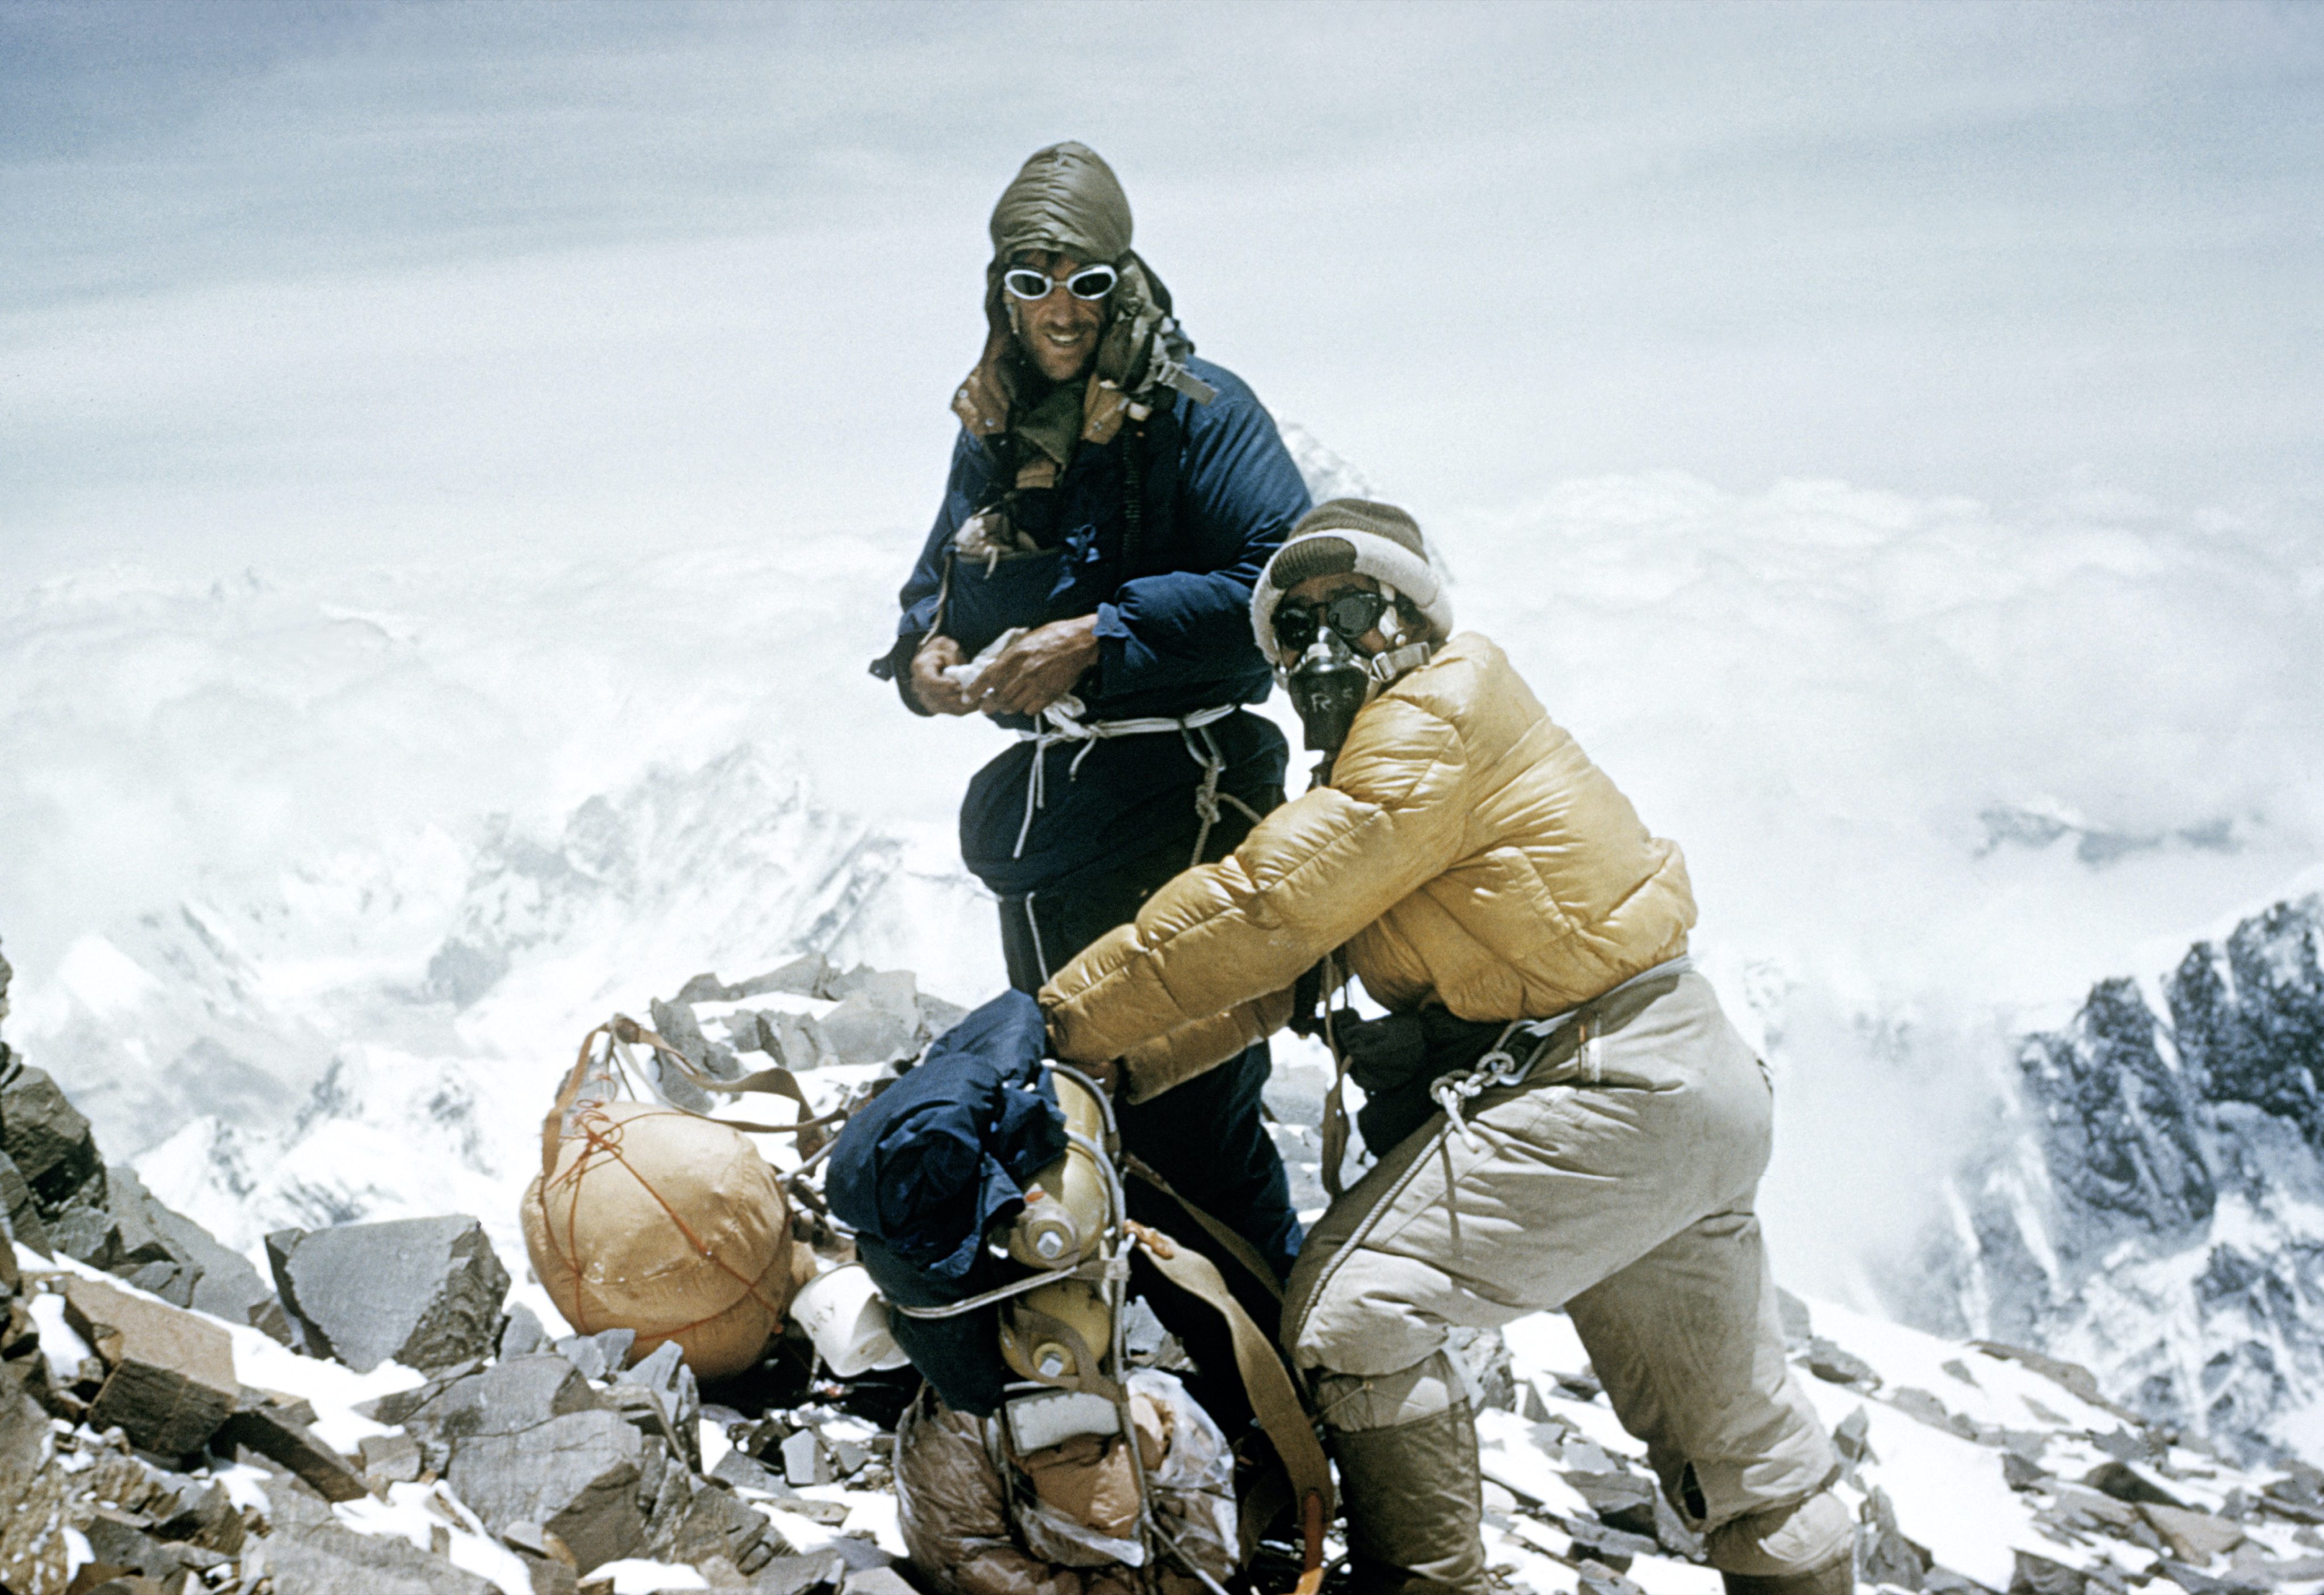 Edmund Hillary and Tenzing Norgay on their climb to the top of Everest in May 1953. What might the men think of the overcrowding on the mountain now? Photo: Alfred Gregory, Royal Geographic Society